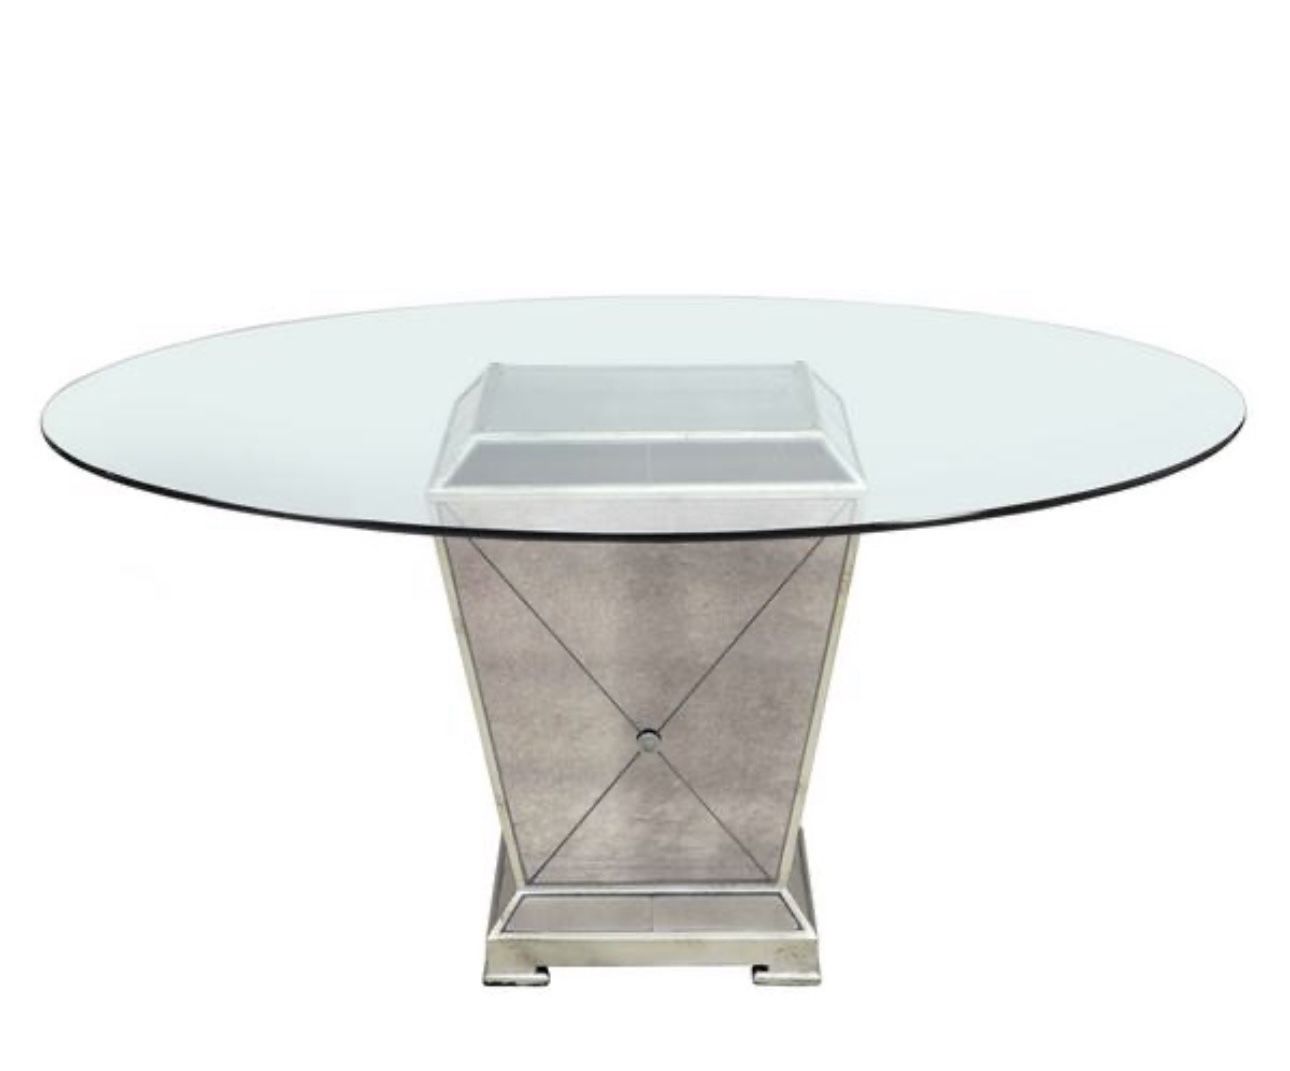 Zgallerie Dining Tables | Borghese Mirrored Glass Round Dining Table